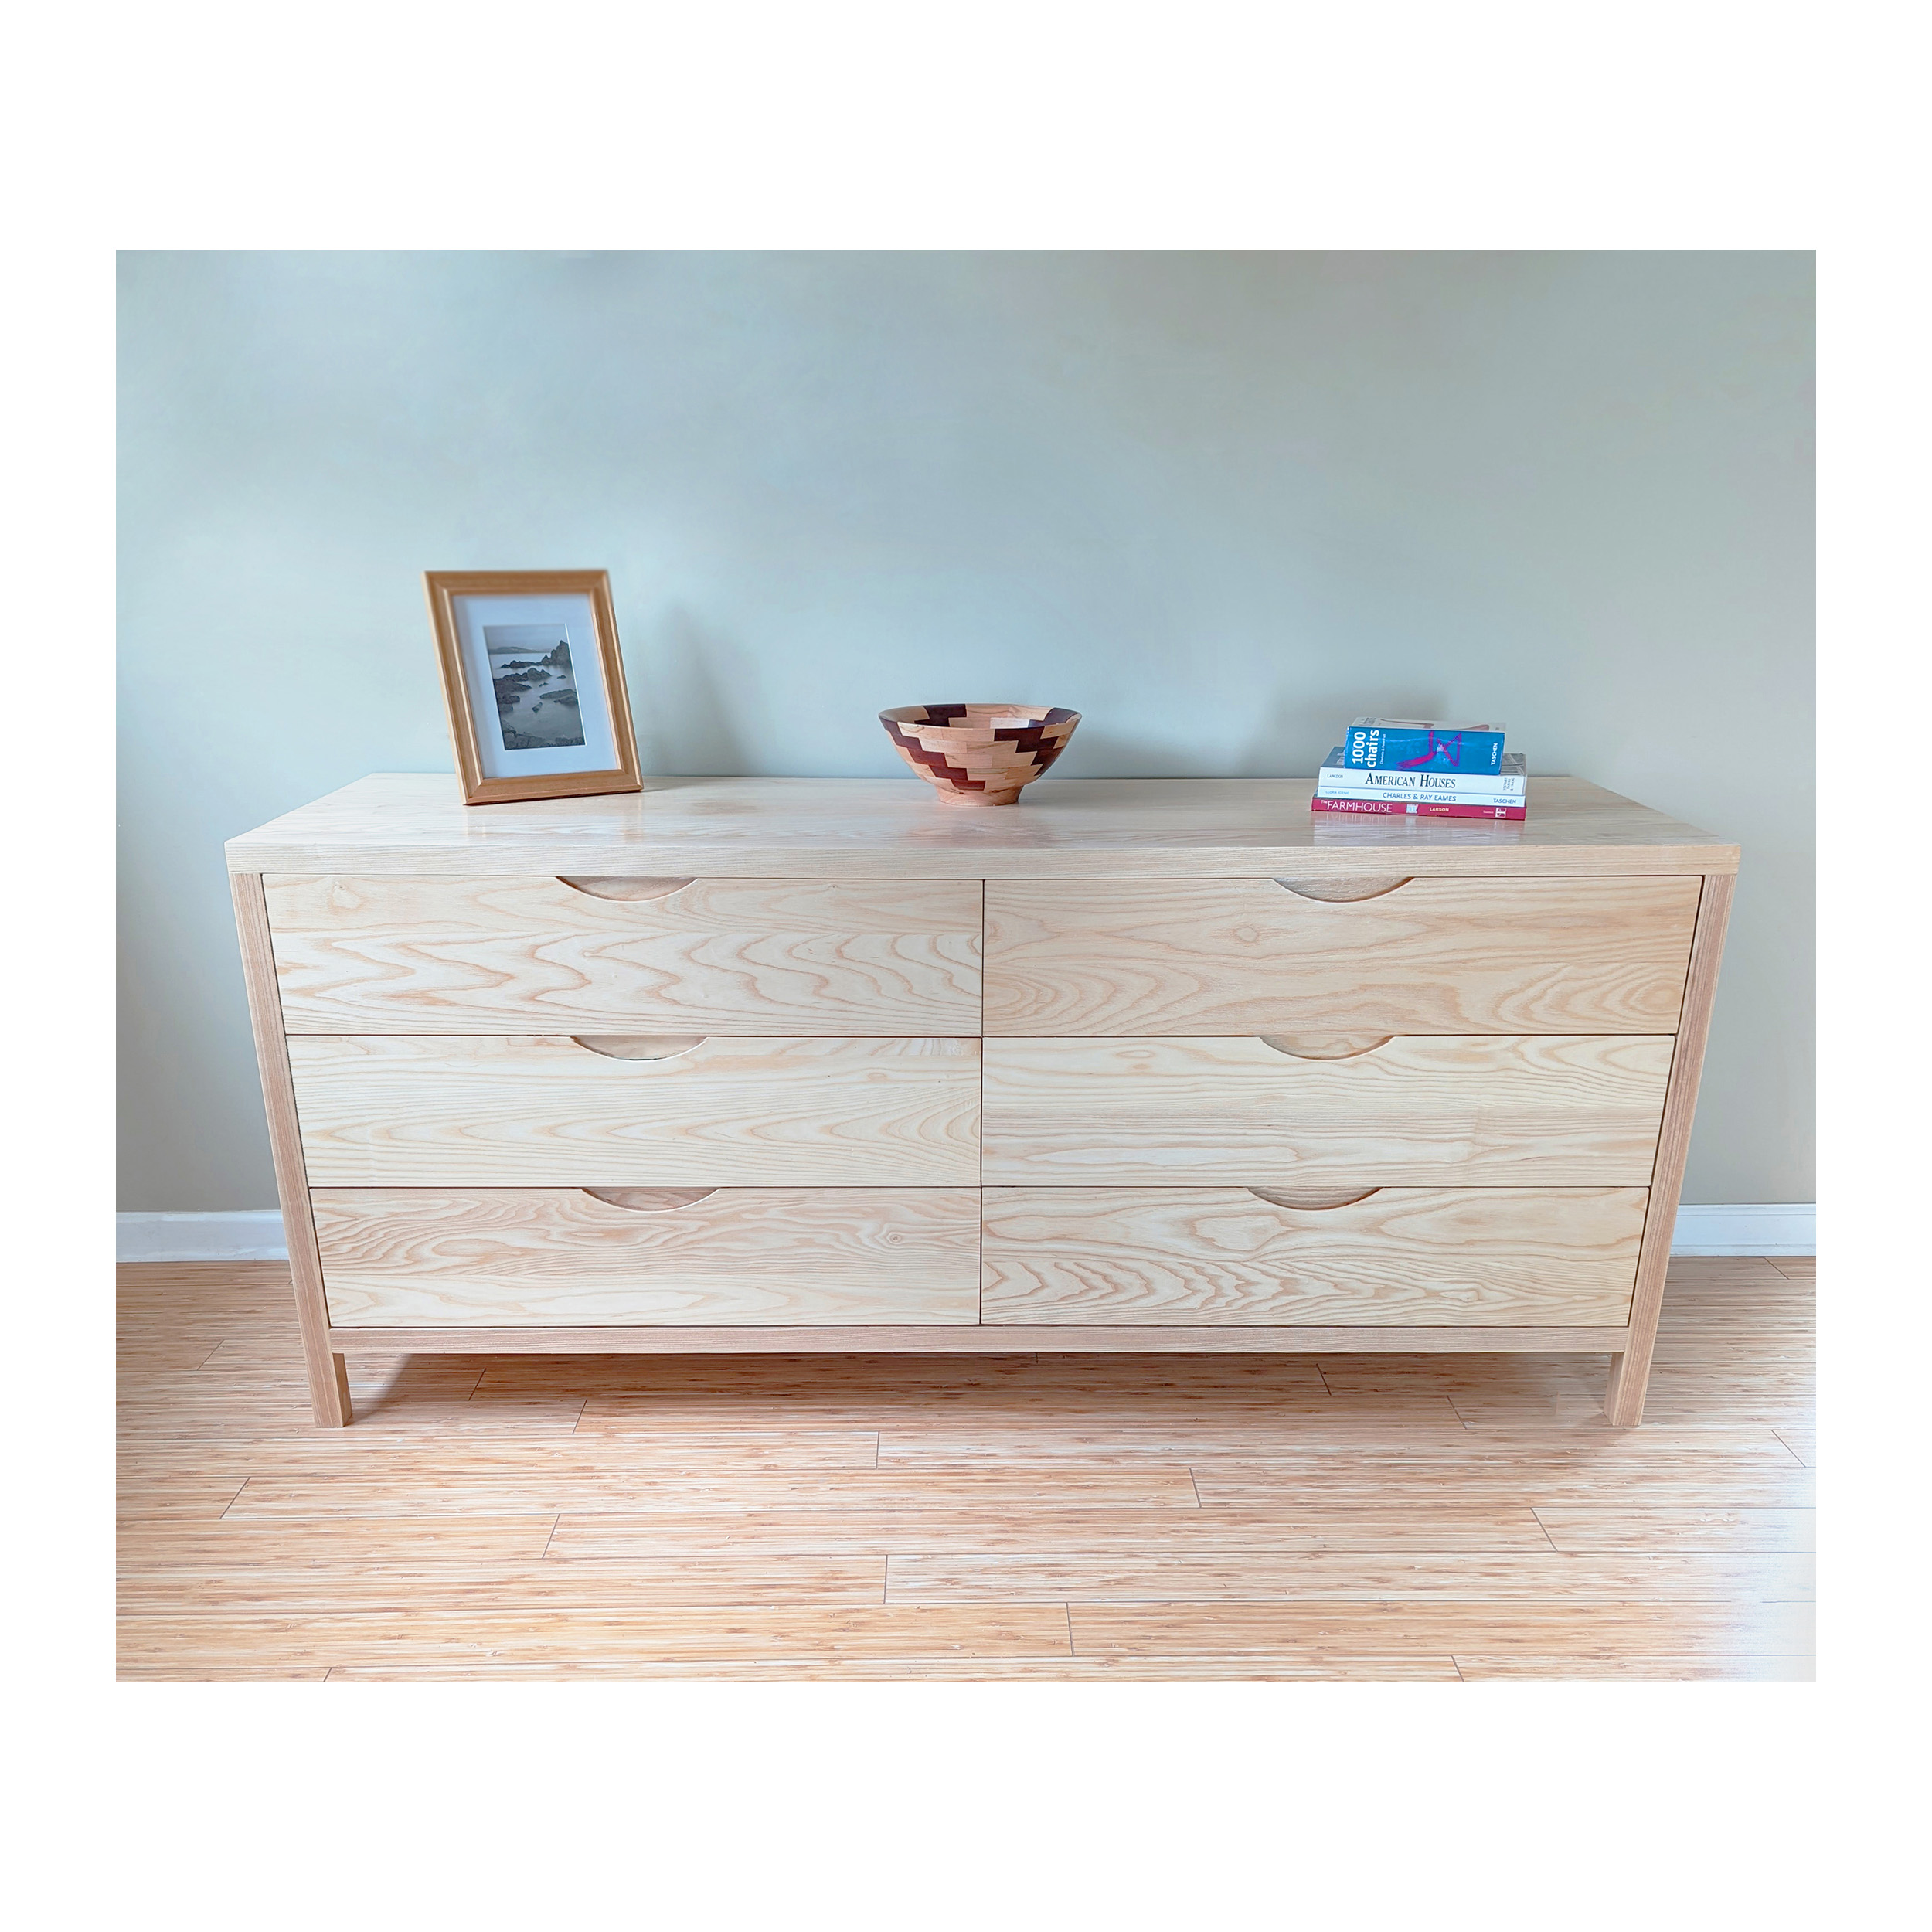 Series 353 Dresser With Six Drawers At 72″ In Width